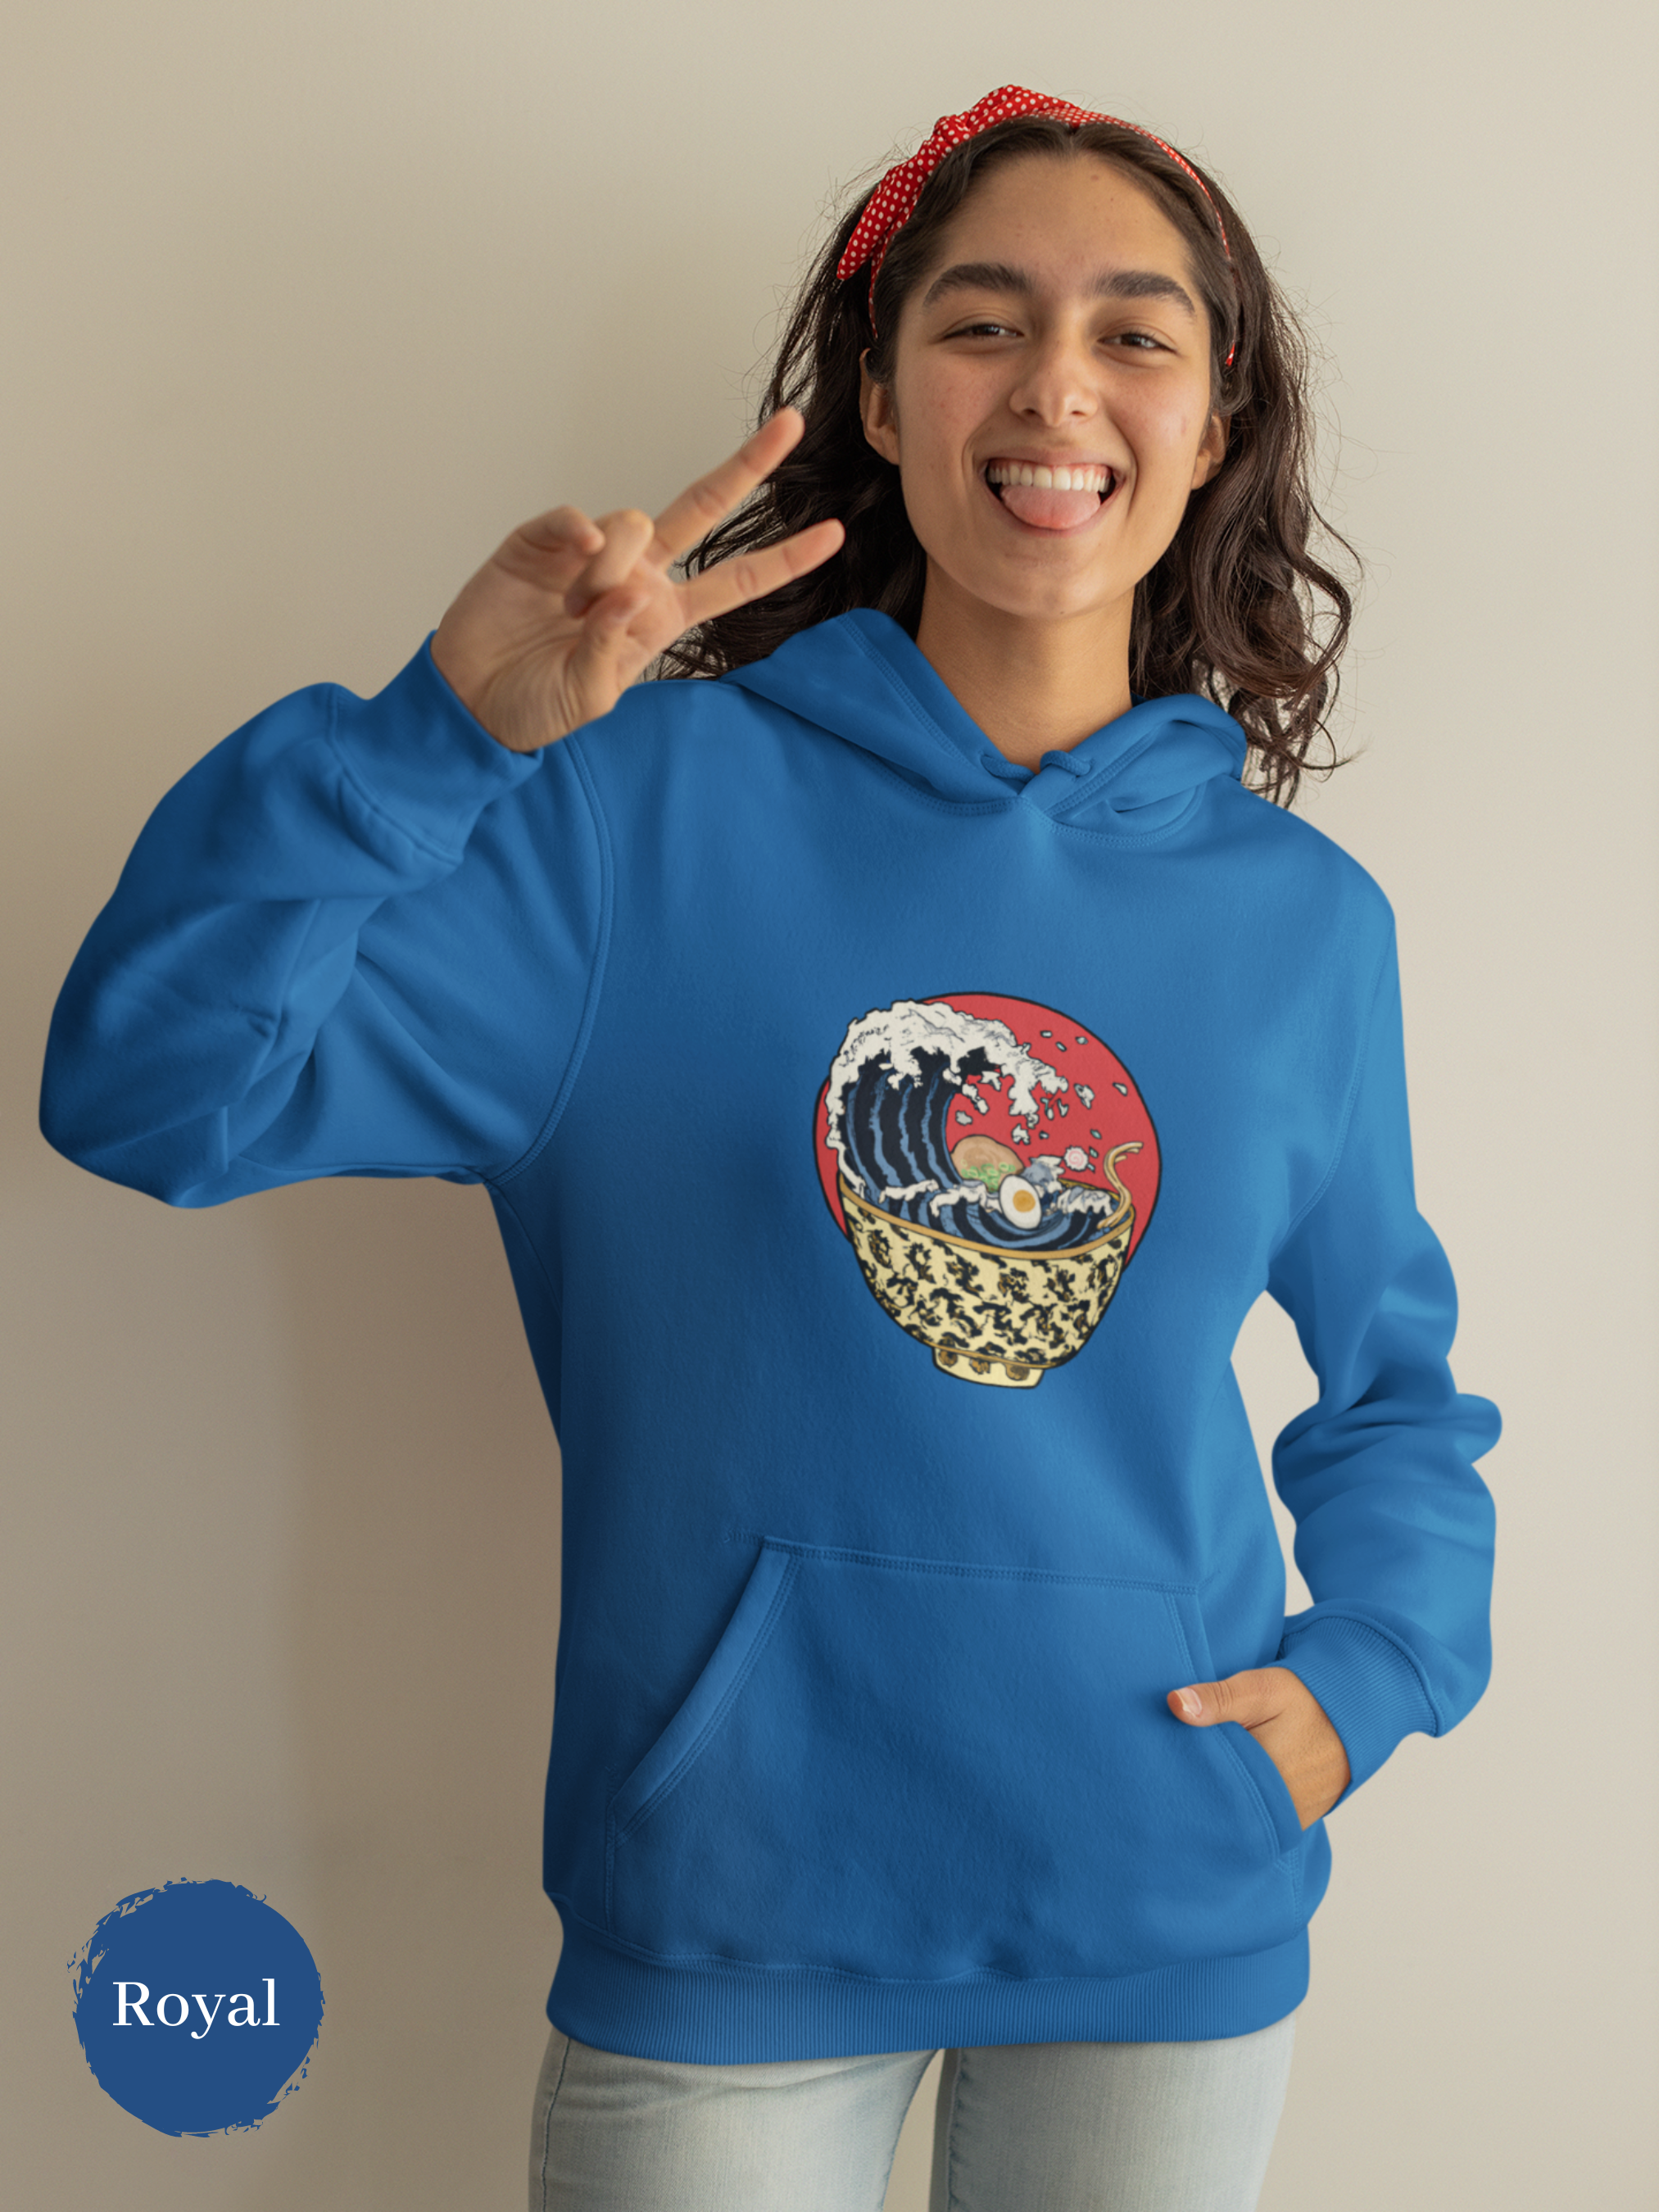 Ramen Hoodie: Hokusai Wave and Noodle Bowl - Asian-Inspired Wearable Art for Foodie Fans